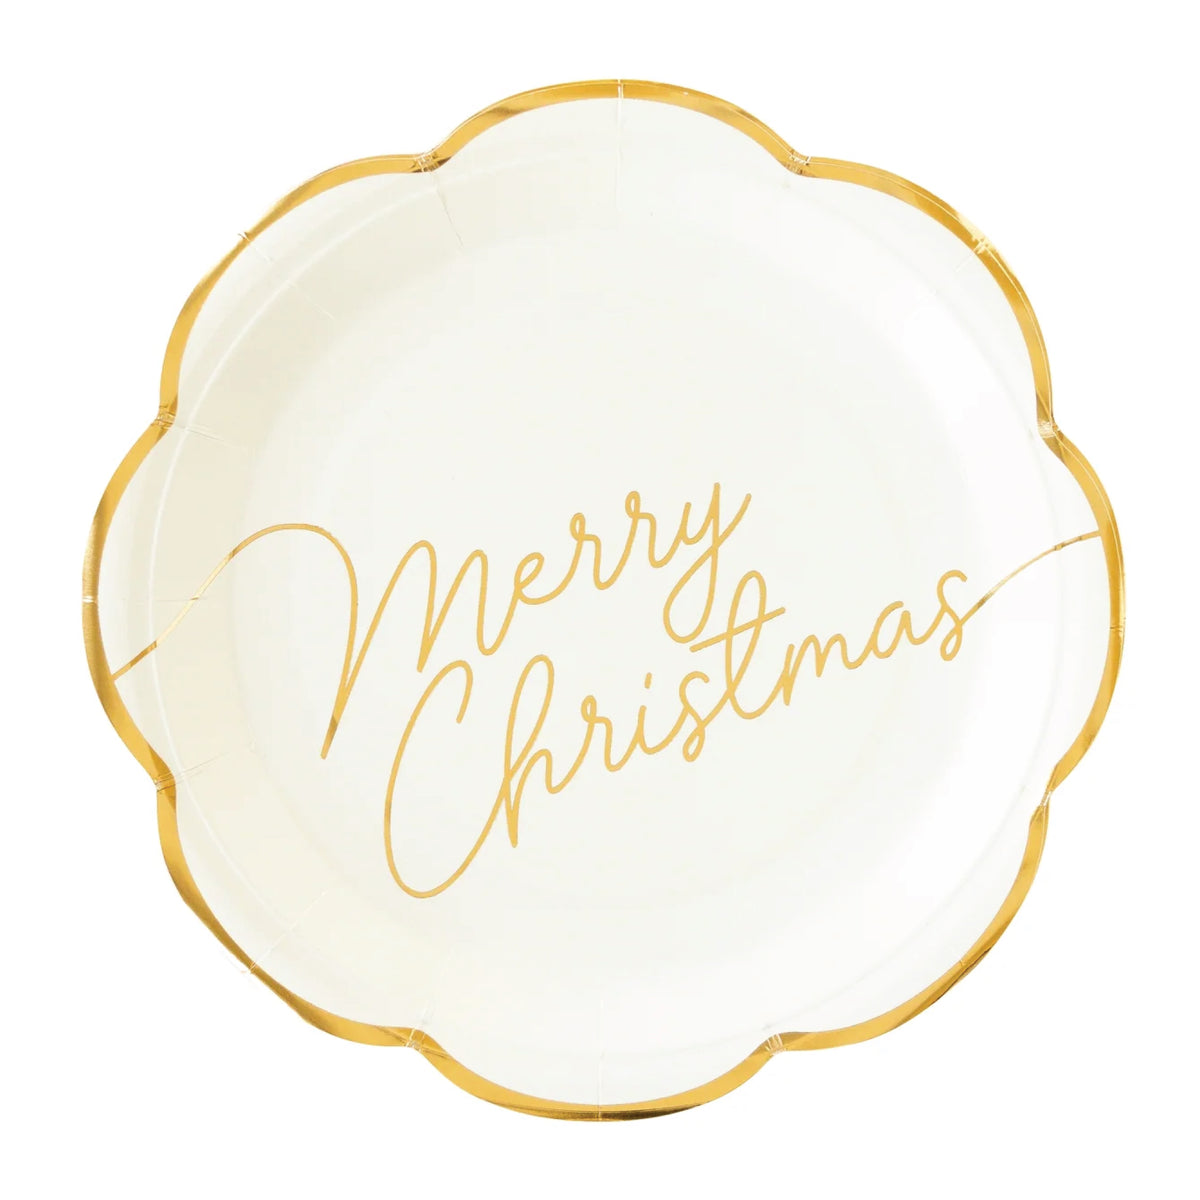 White & Gold Scalloped Dessert Plates 6ct | The Party Darling